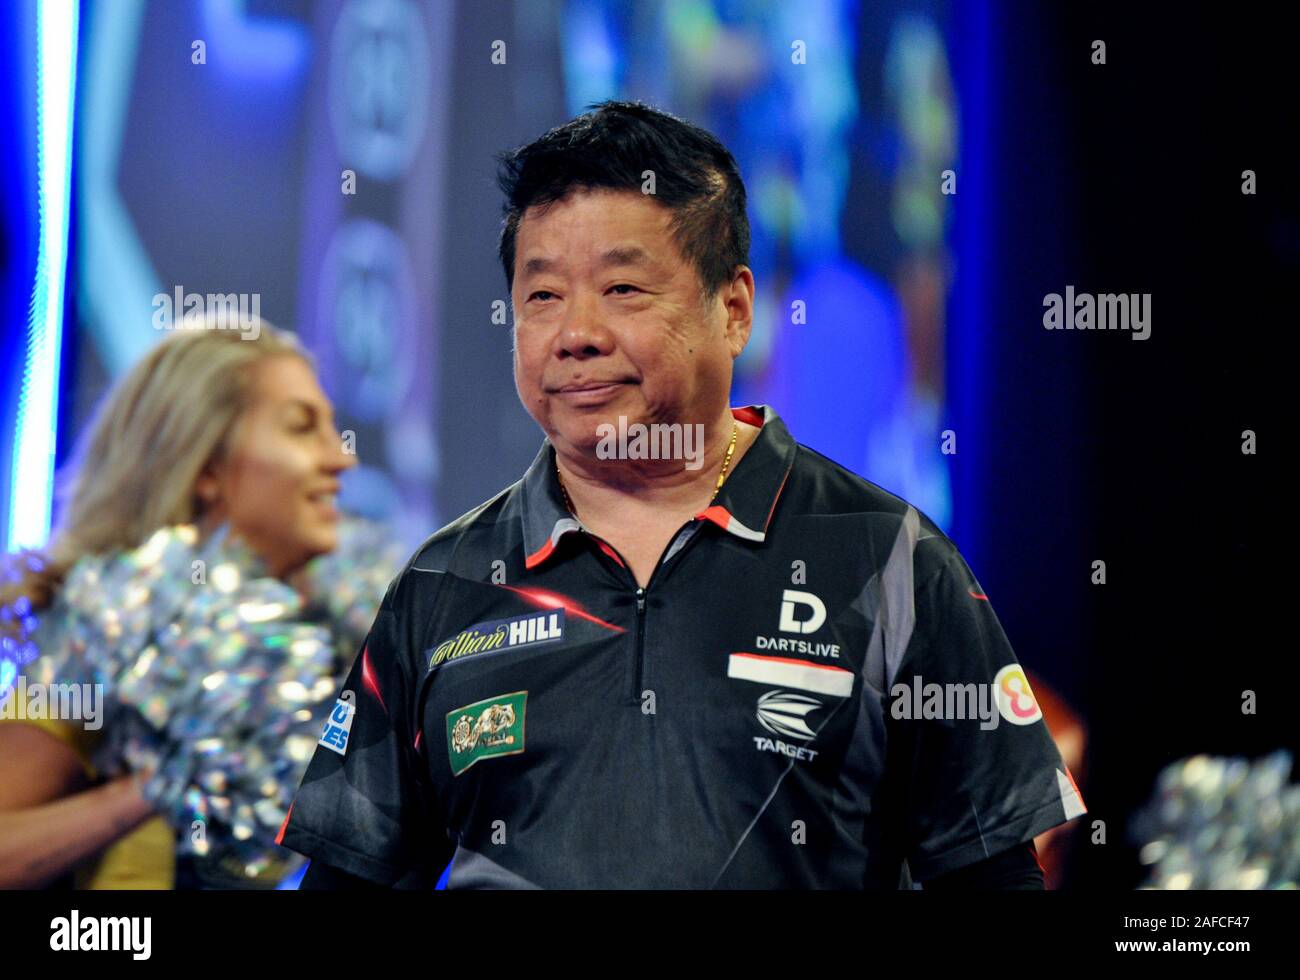 fraktion Ham selv Og så videre 14 december 2019 London, Great Britain William Hill World Darts  Championship Paul Lim during day 2 of the William Hill World Darts  Championship of darts at Alexandra Palace (Ally Pally) in Londen